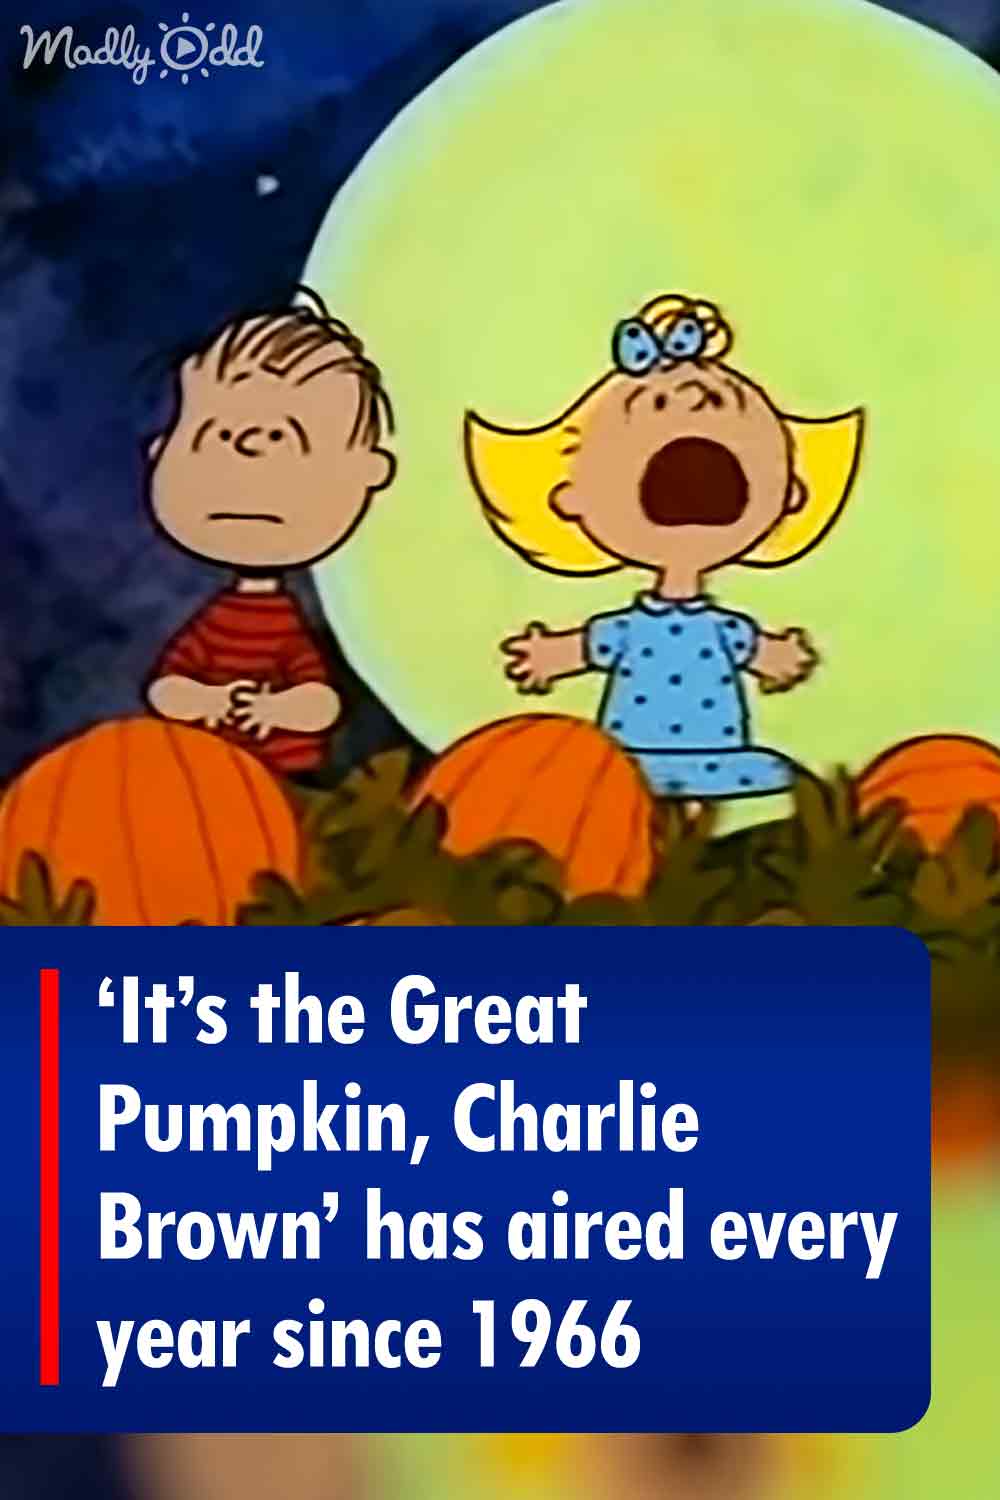 ‘It’s the Great Pumpkin, Charlie Brown’ has aired every year since 1966